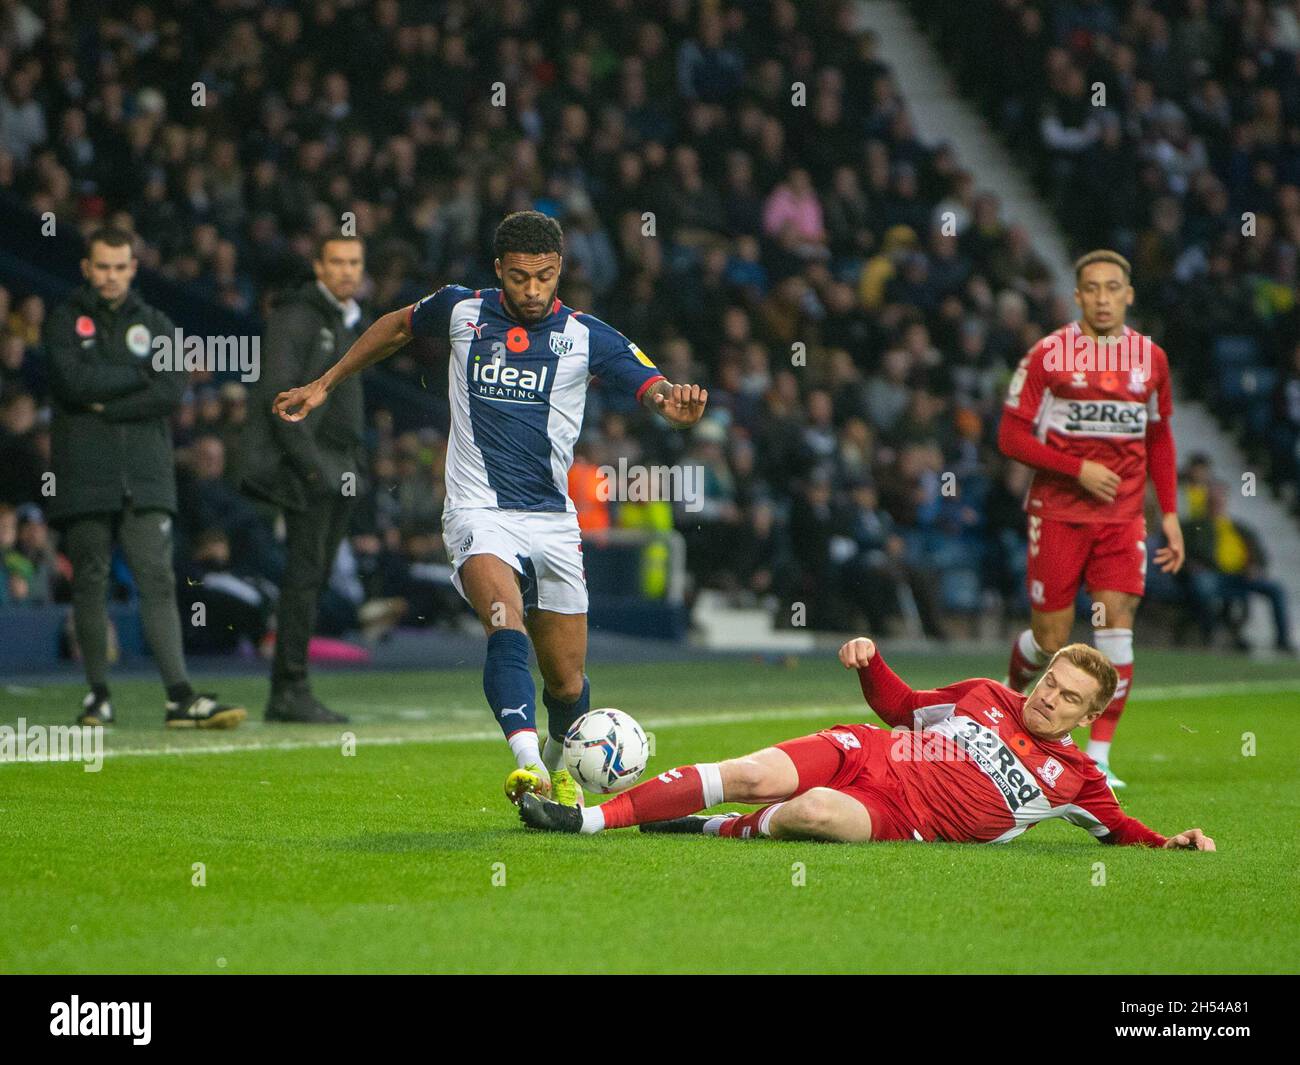 Darnell Furlong #2 of West Bromwich Albion is challenged by Duncan Watmore #18 of Middlesbrough in, on 11/6/2021. (Photo by Gareth Dalley/News Images/Sipa USA) Credit: Sipa USA/Alamy Live News Stock Photo